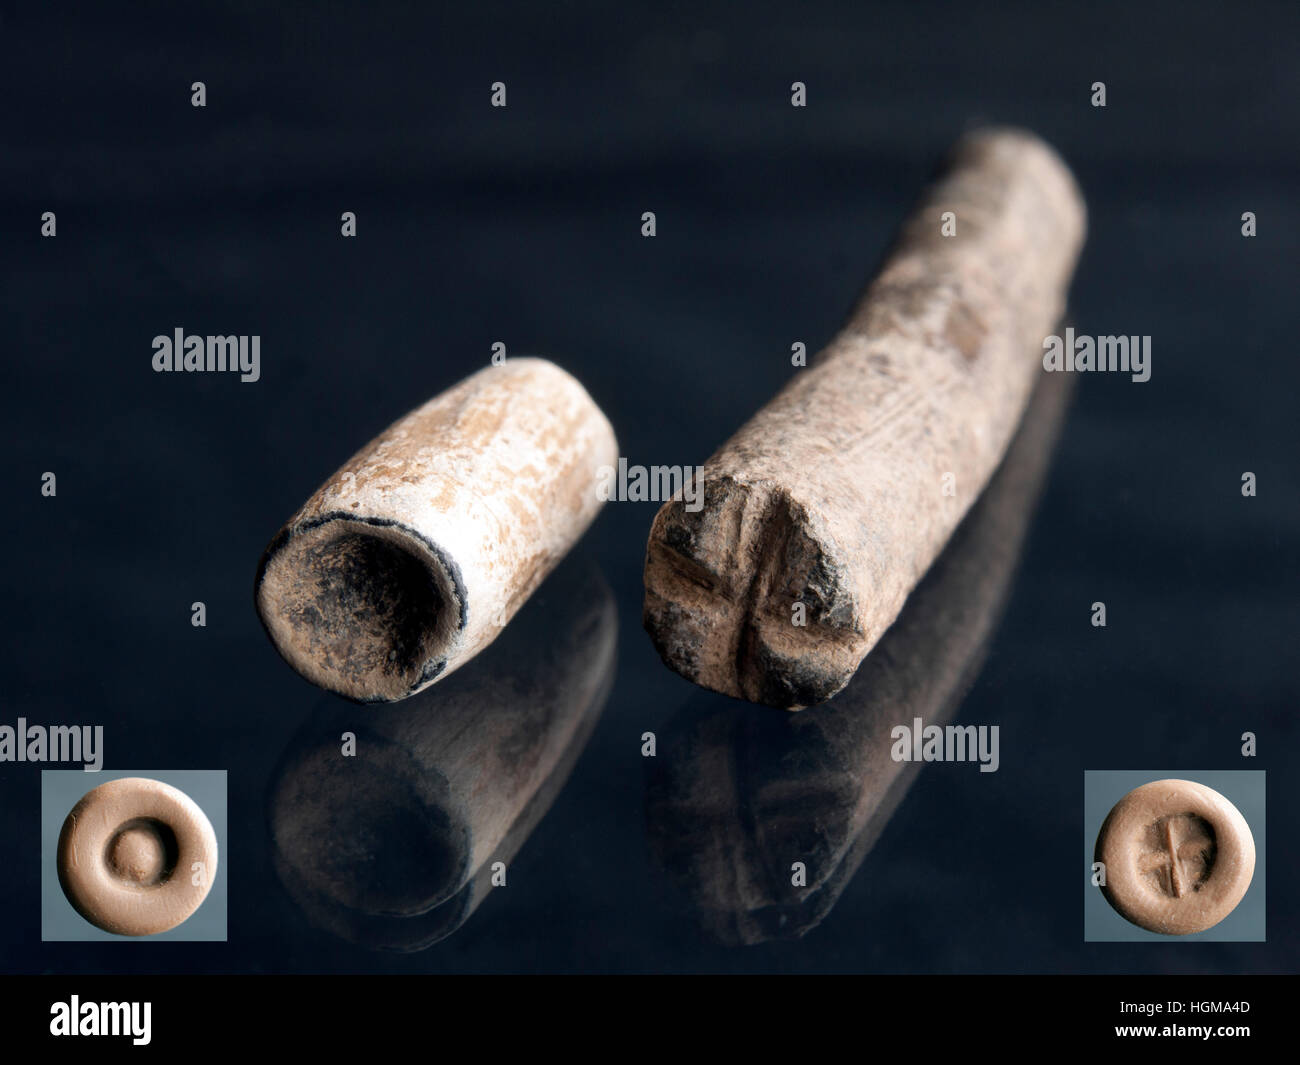 Anglo-Saxon potter's lead die or stamp with impressions/motifs. CLAY POTS Stock Photo